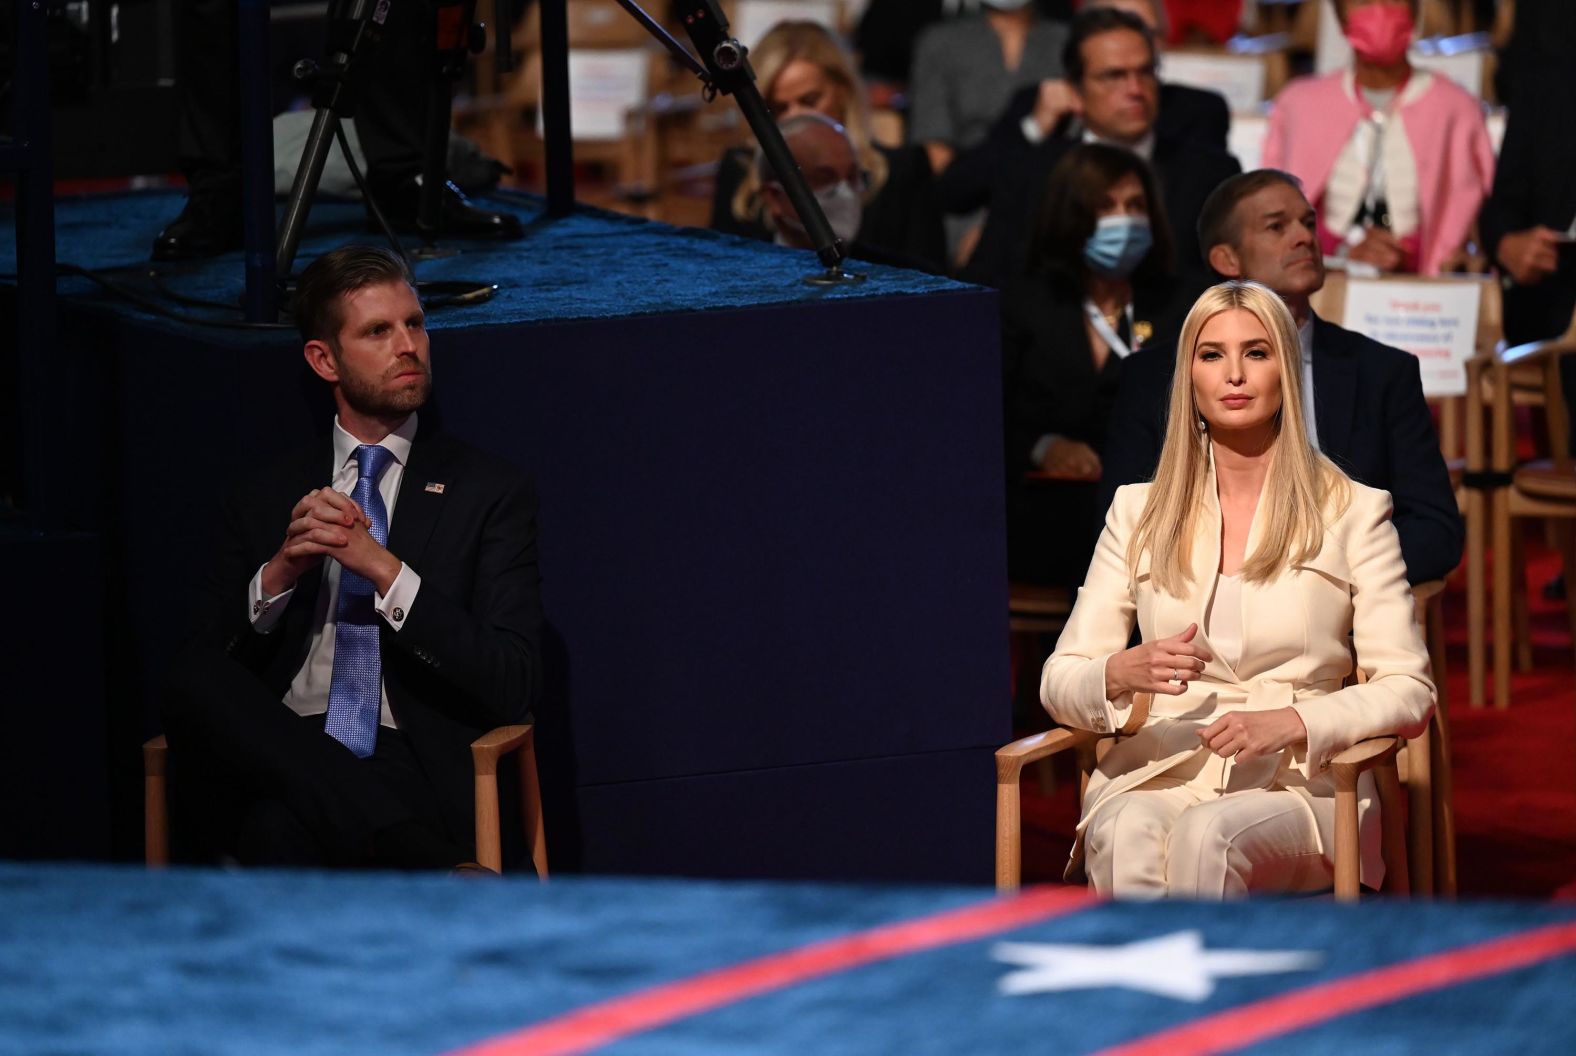 Trump's son Eric and daughter Ivanka attend the debate.